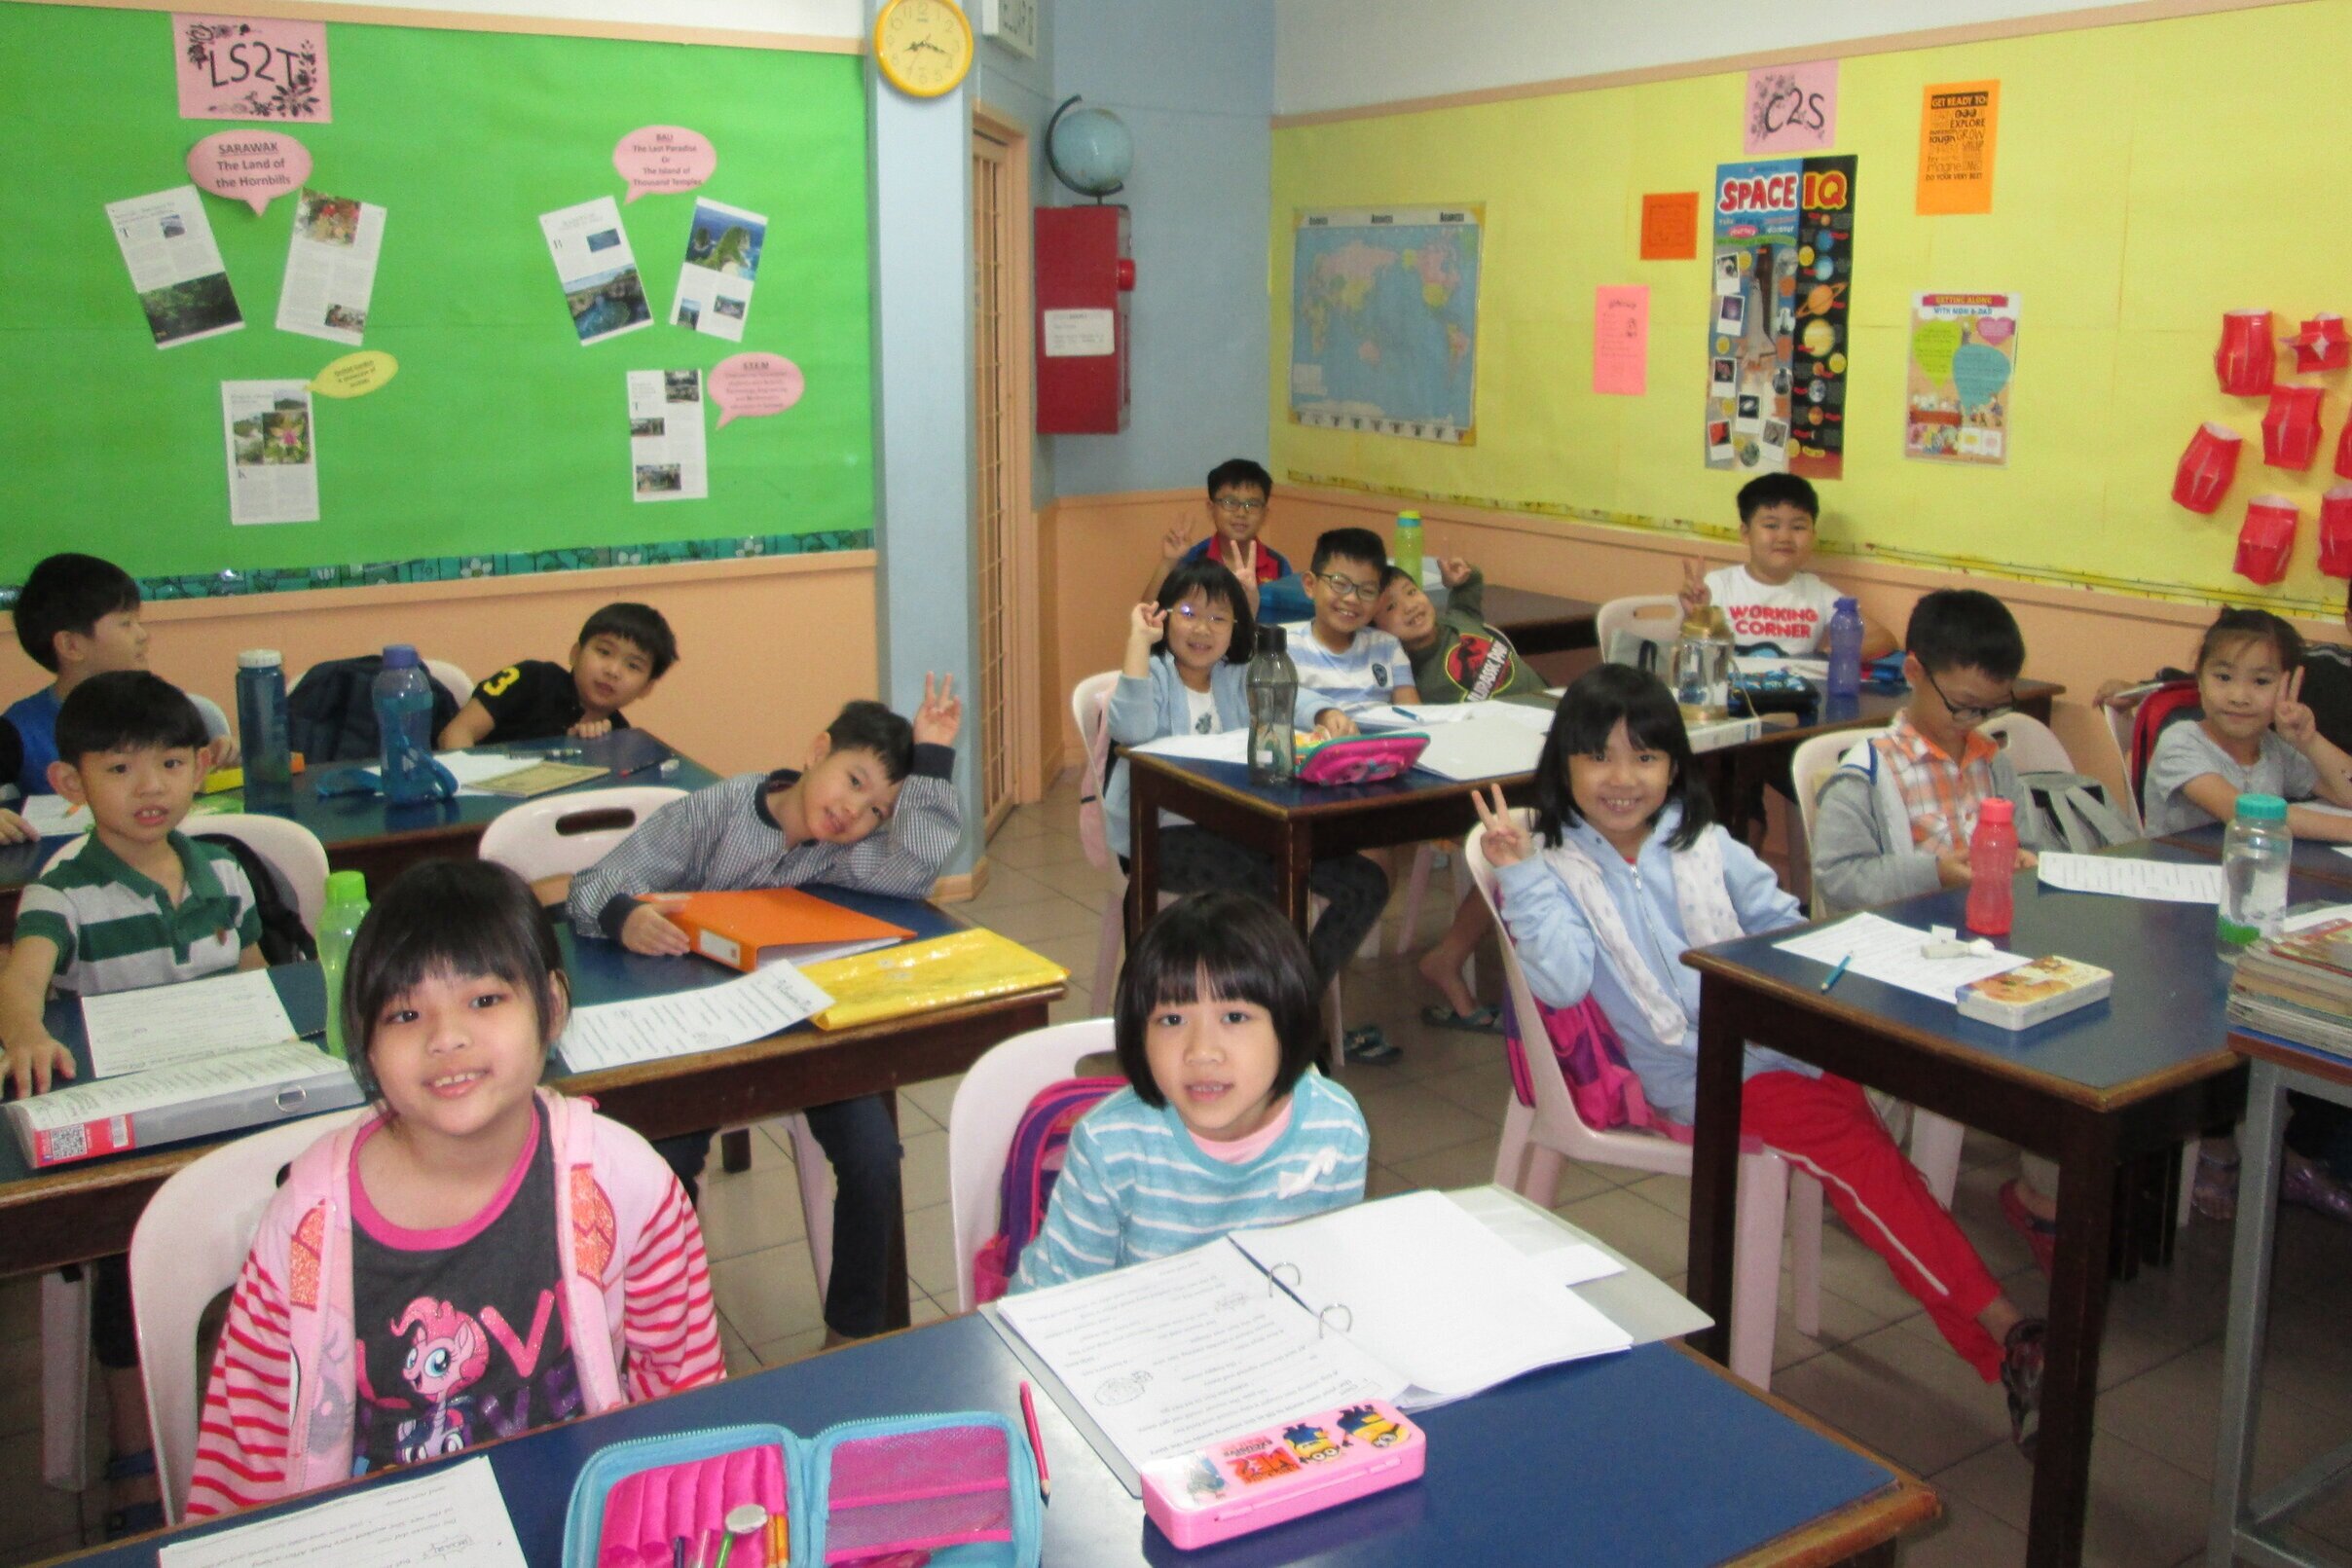 Students comfortably seated in class (Copy)